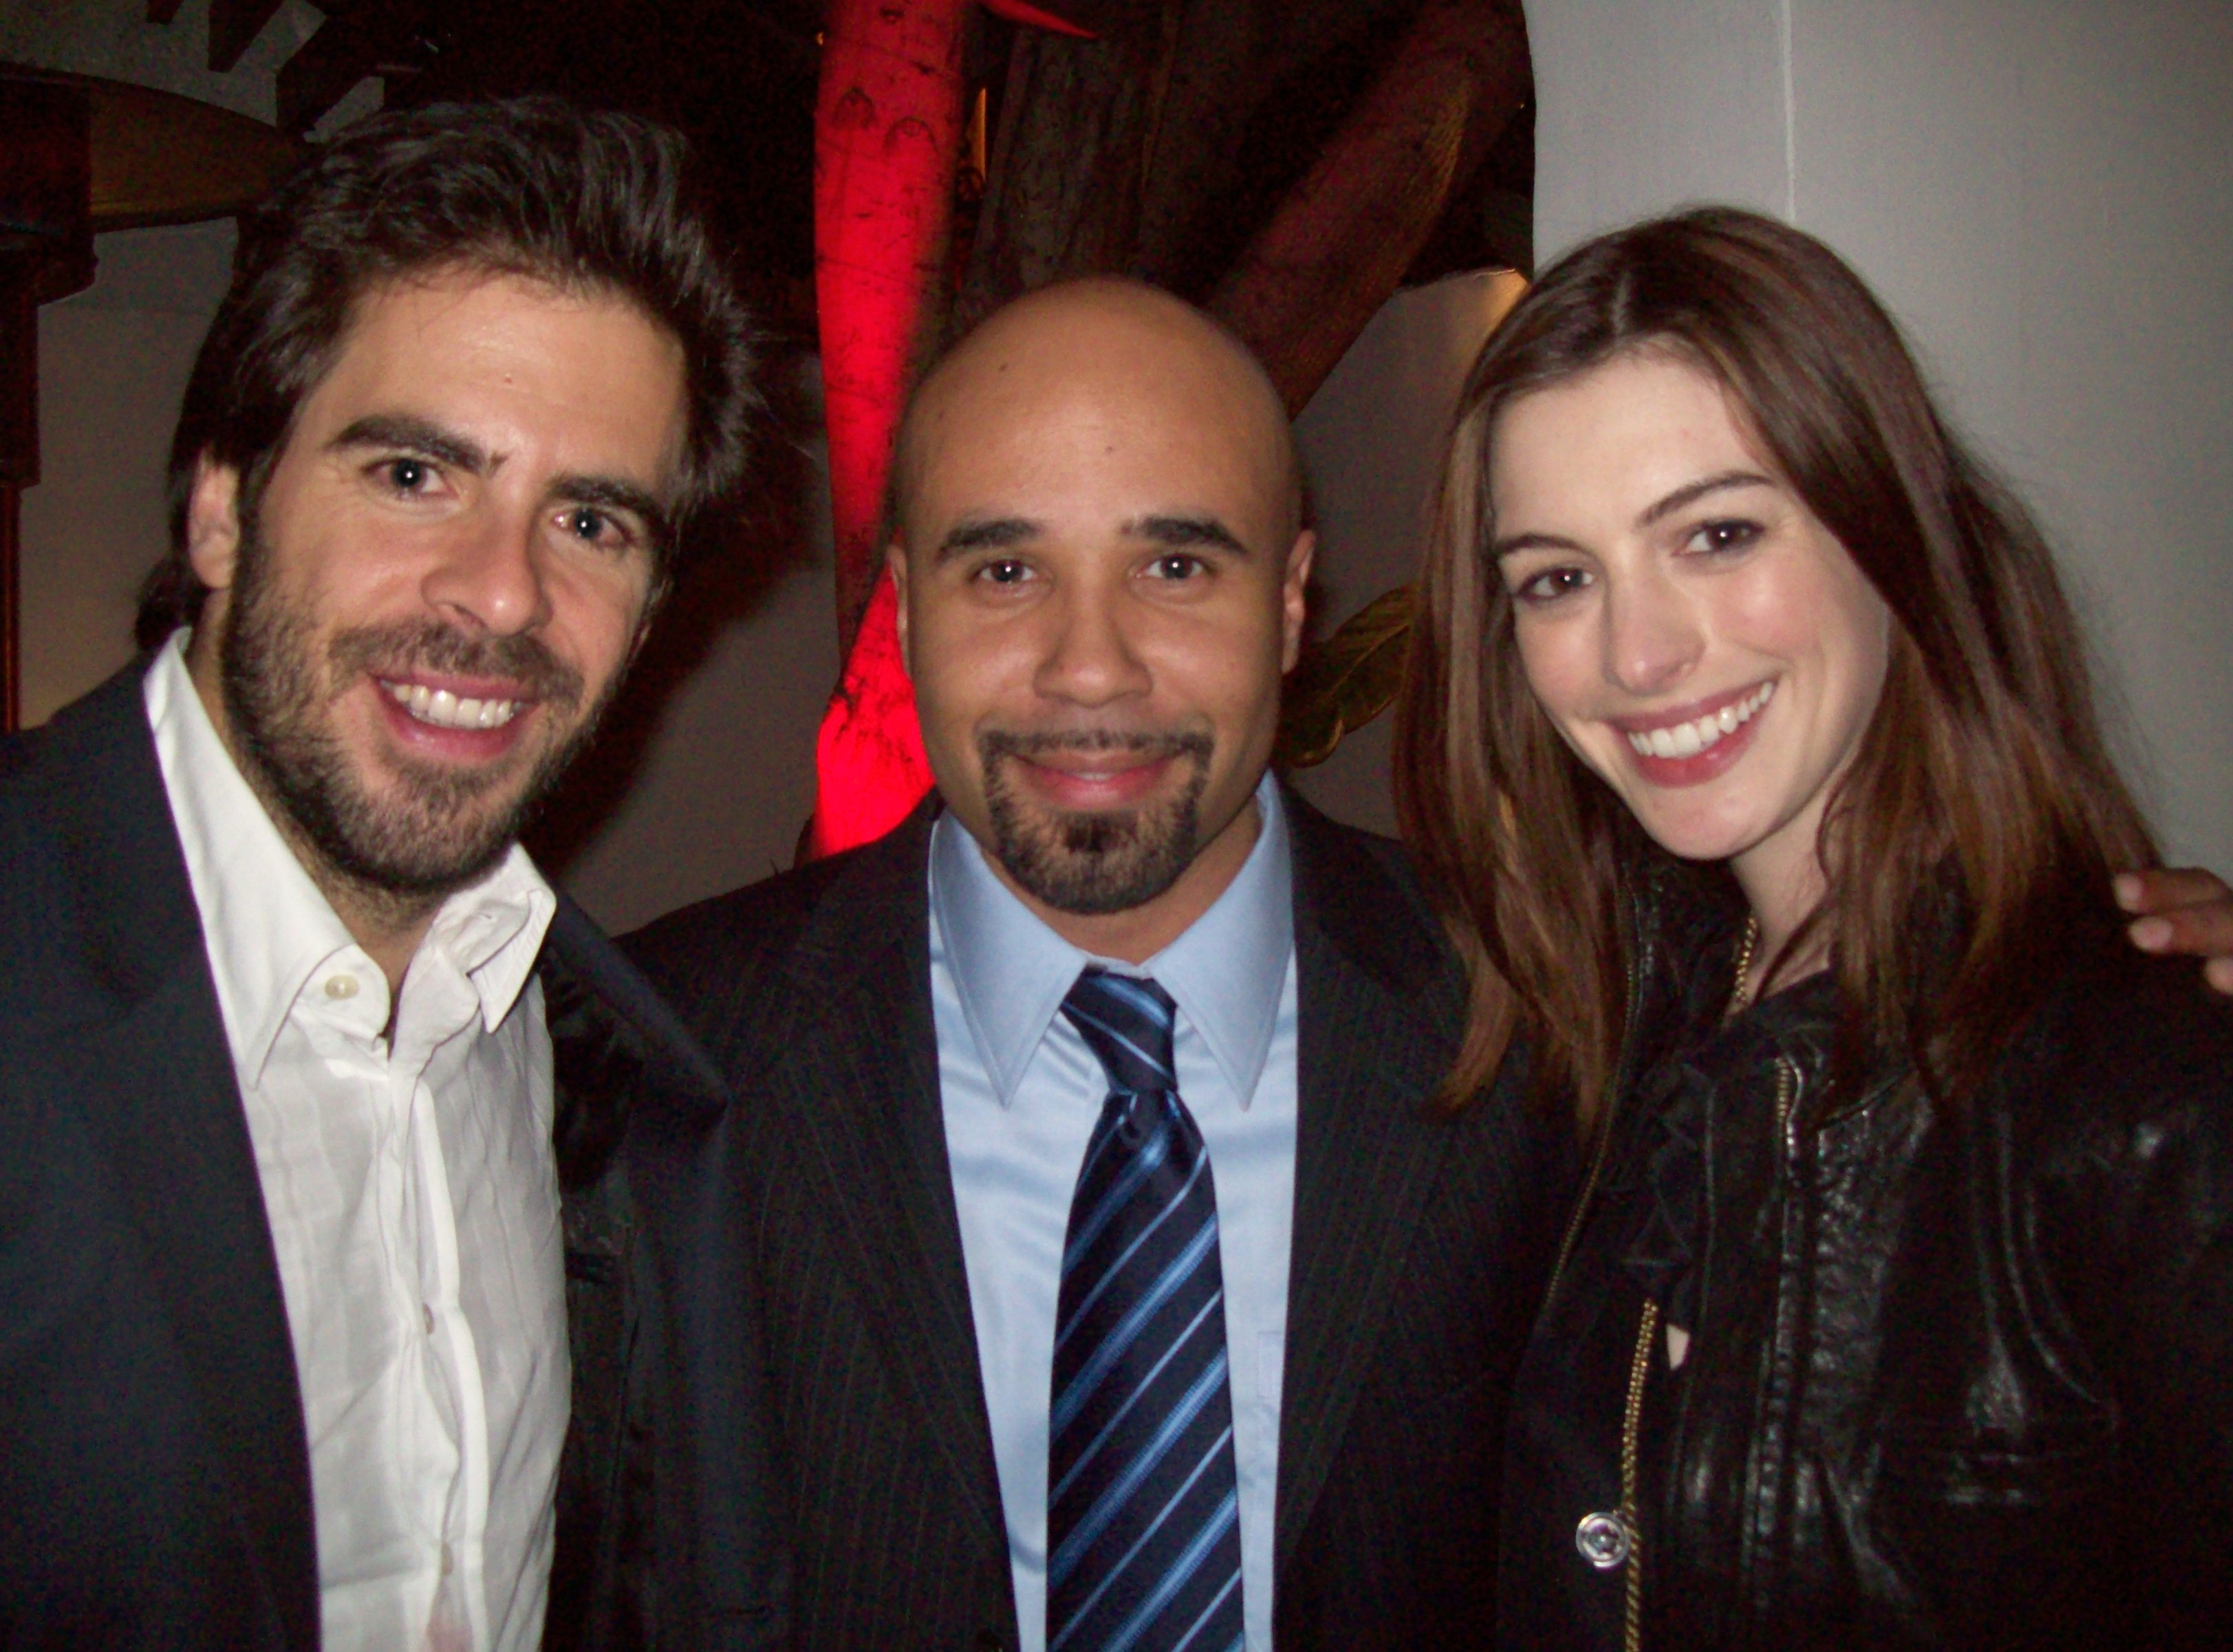 Eli Roth, Chris Roe, Anne Hathaway at the Inglorious Bastards Oscar Nomination Party. Hollywood, CA Feb. 2010